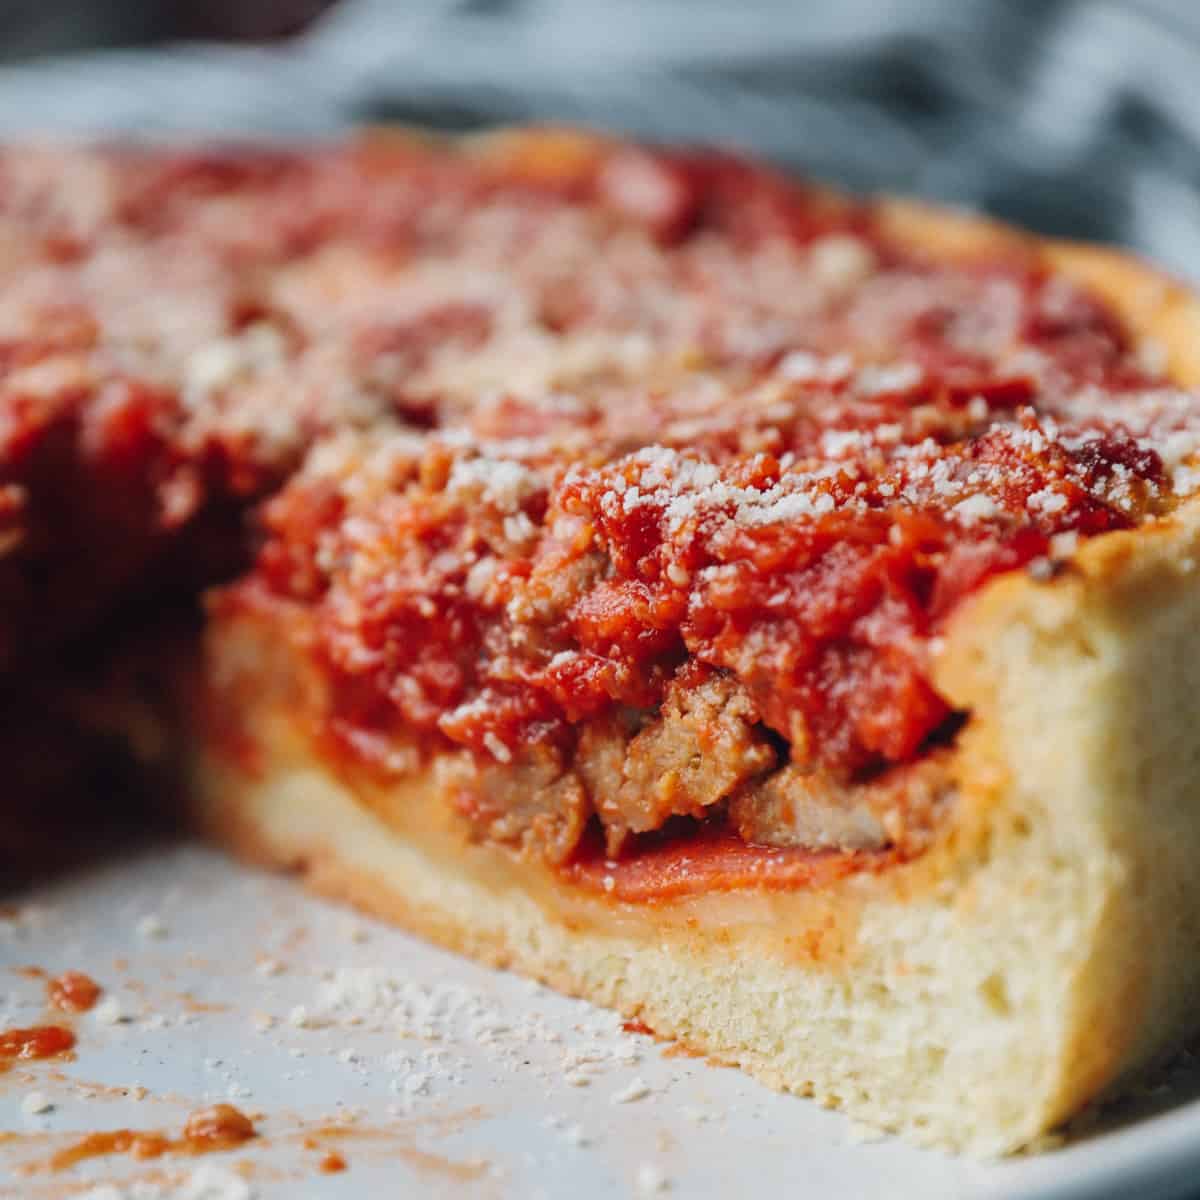 https://www.thecookierookie.com/wp-content/uploads/2022/12/Featured-Chicago-Style-Deep-Dish-Pizza-1.jpg